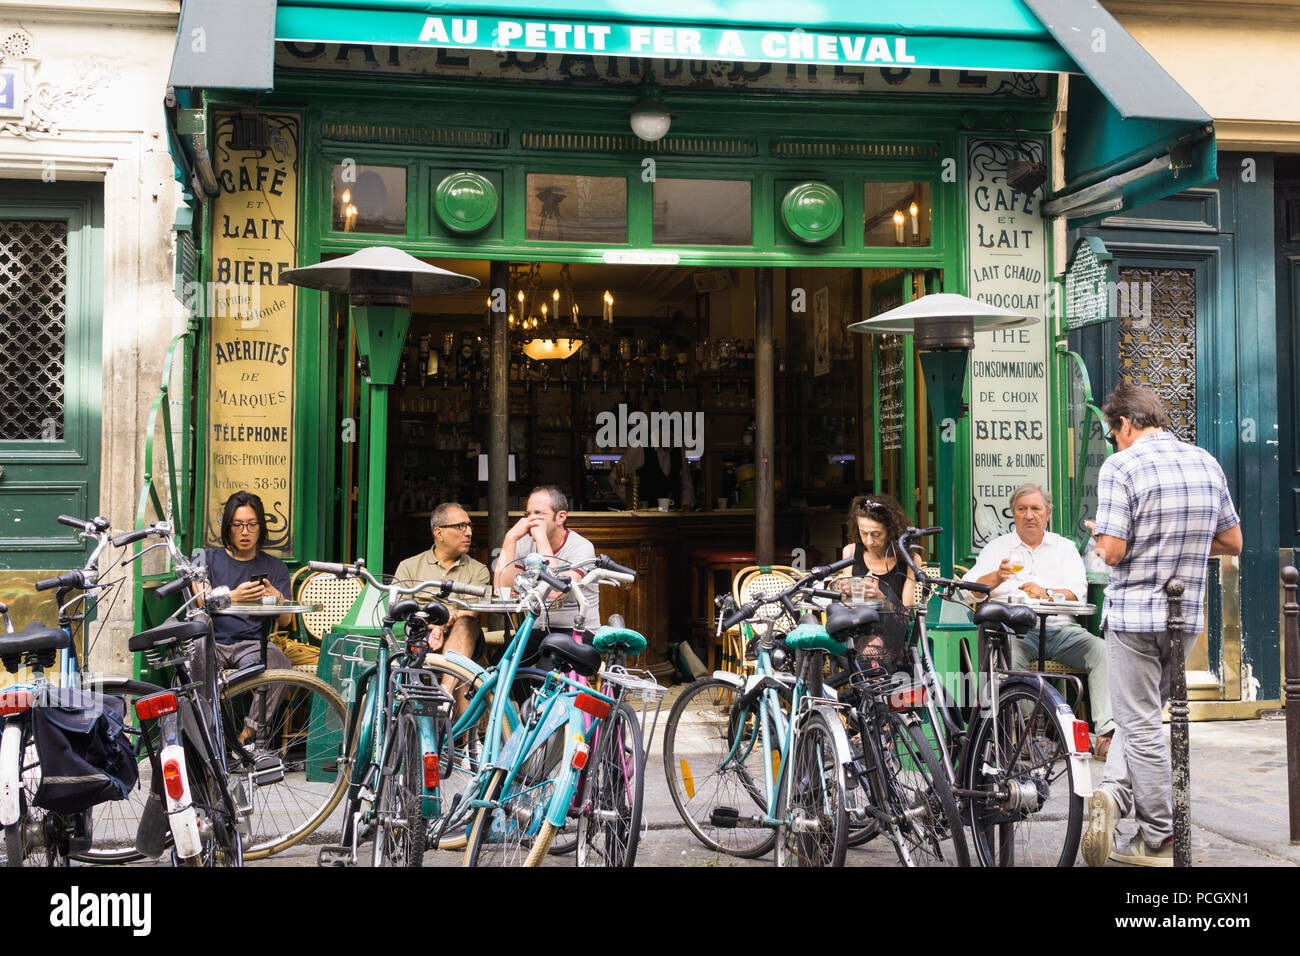 Paris cafe Au Petit Fer a Cheval - Patrons enjoying morning coffee at the cafe Au Petit Fer a Cheval with bicycles parked in front, France, Europe. Stock Photo